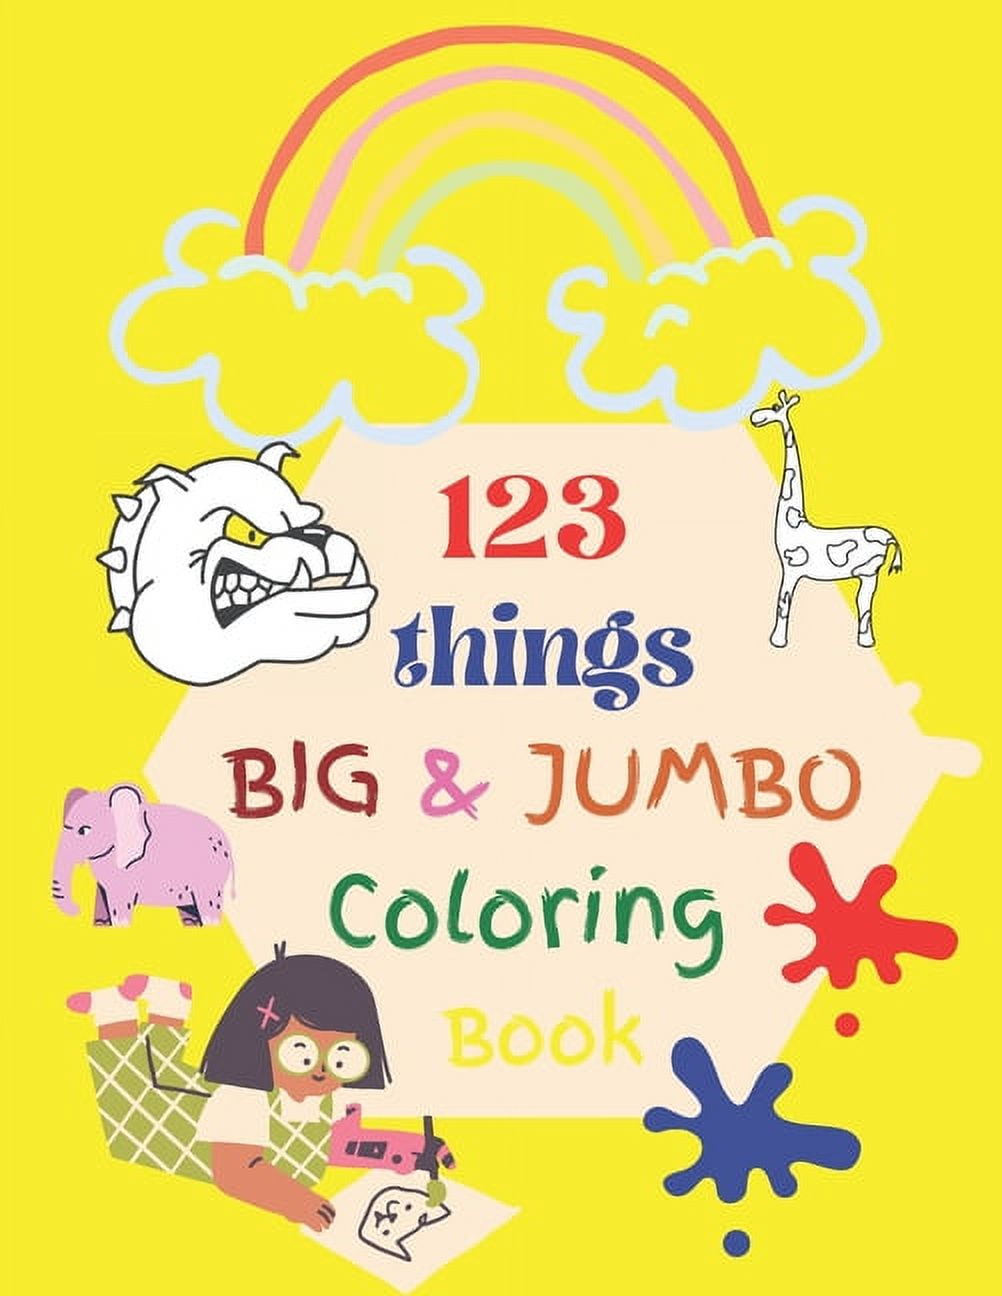 123 things BIG & JUMBO Coloring Book: 123 Coloring Pages! Easy